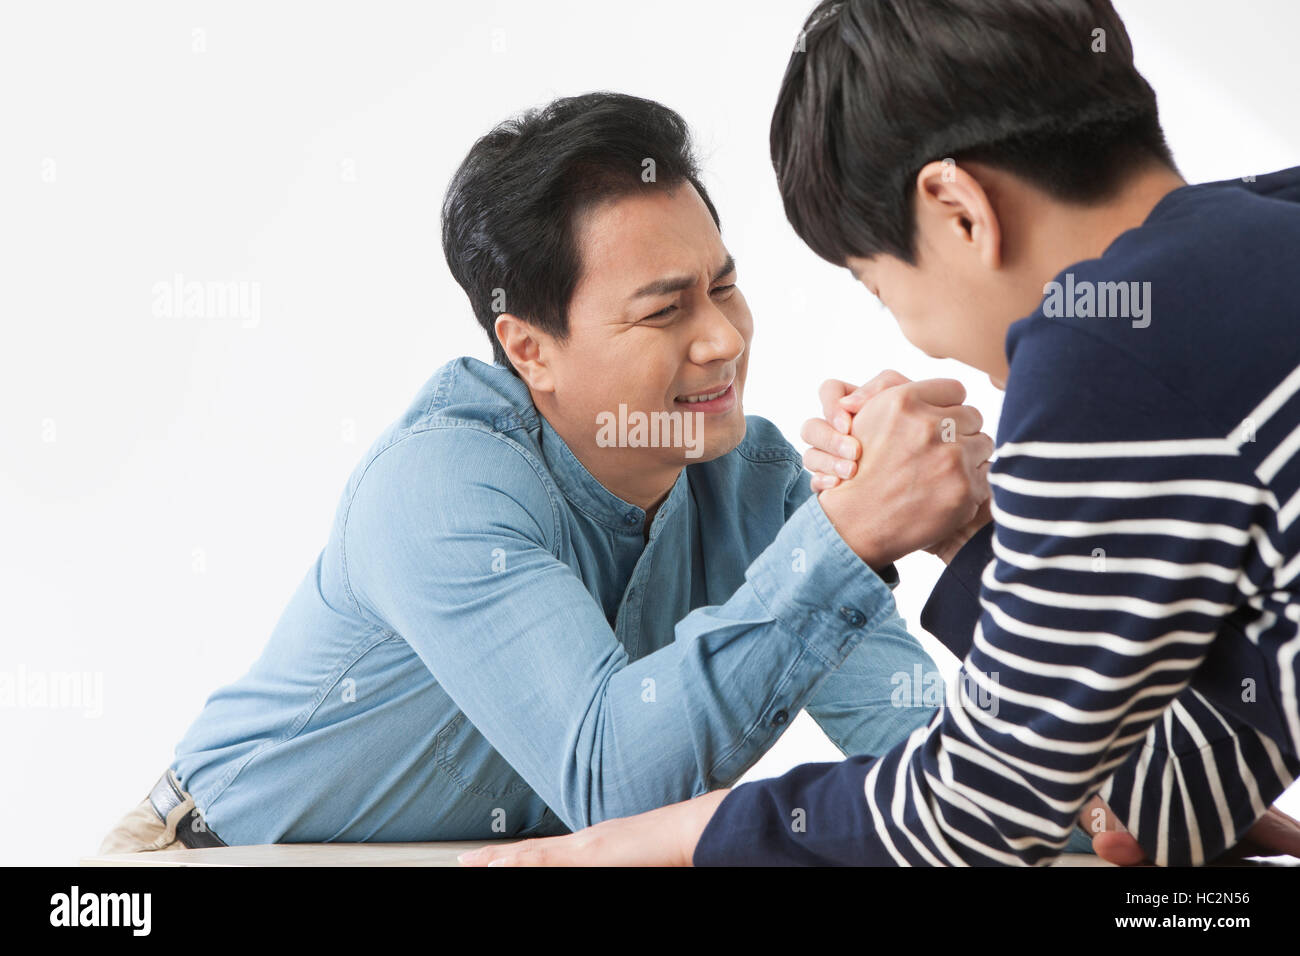 Side view of middle aged father and son arm-wrestling Stock Photo